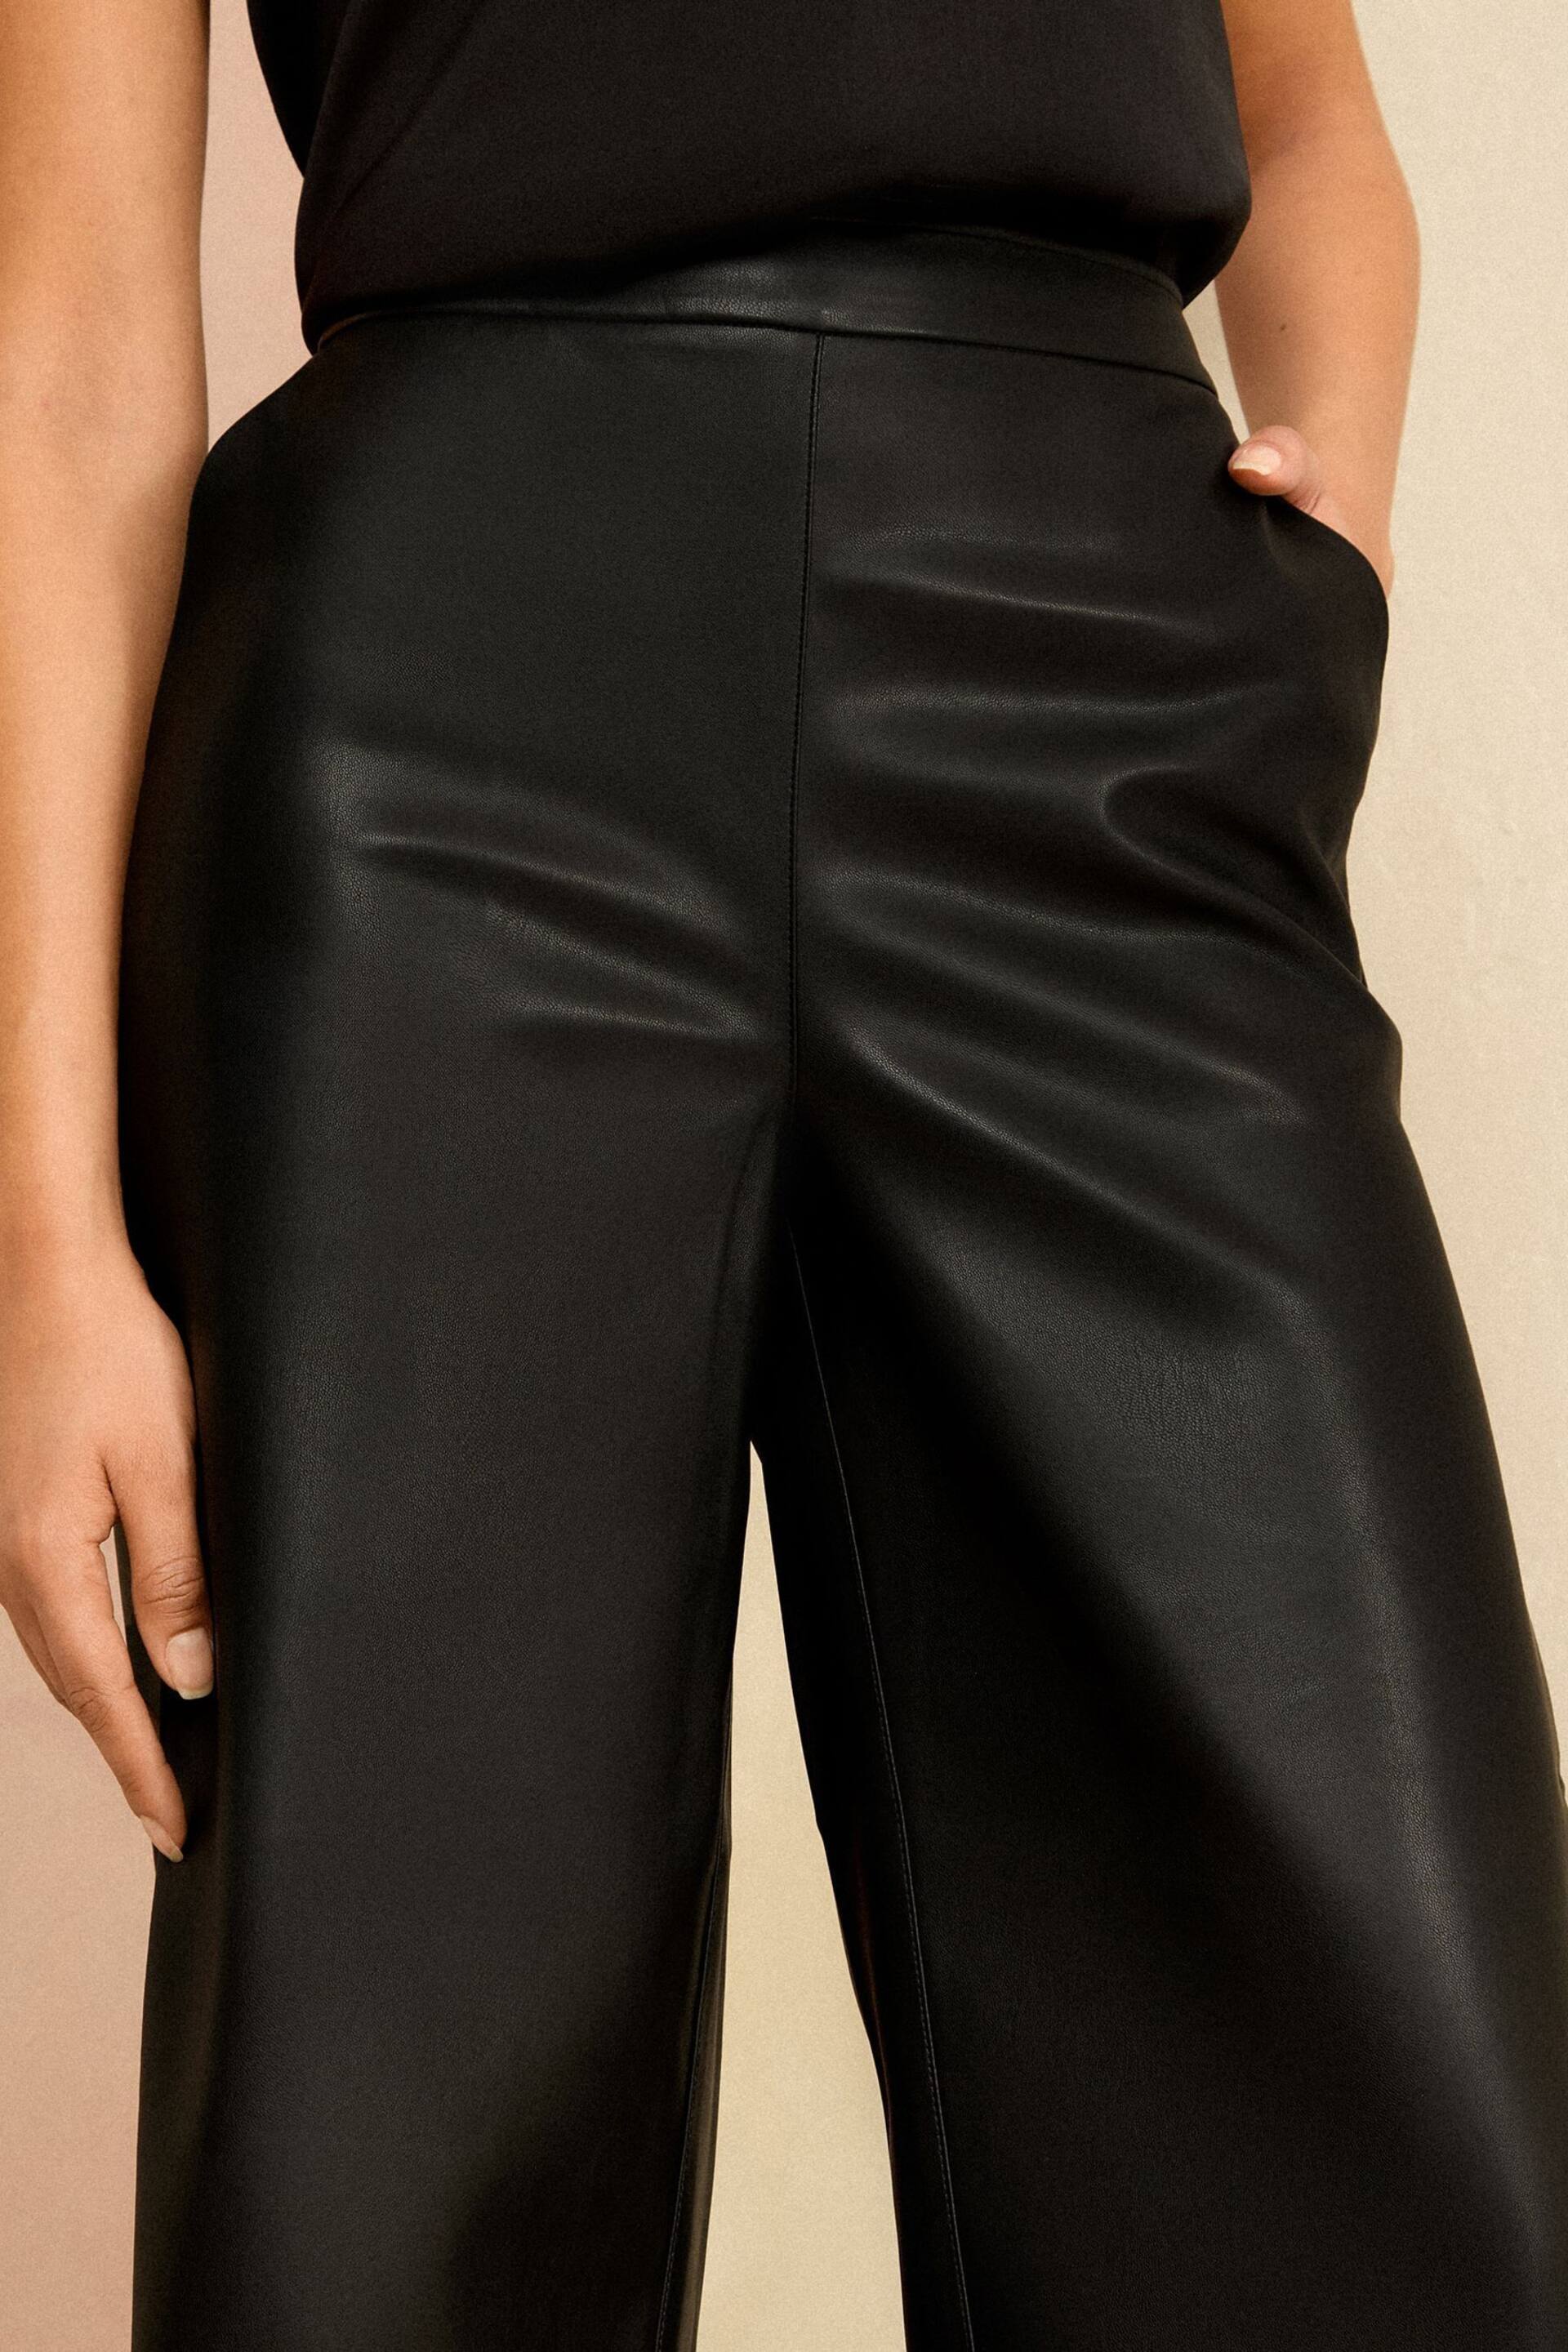 Love & Roses Black Petite Faux Leather Culotte Trousers - Image 2 of 4